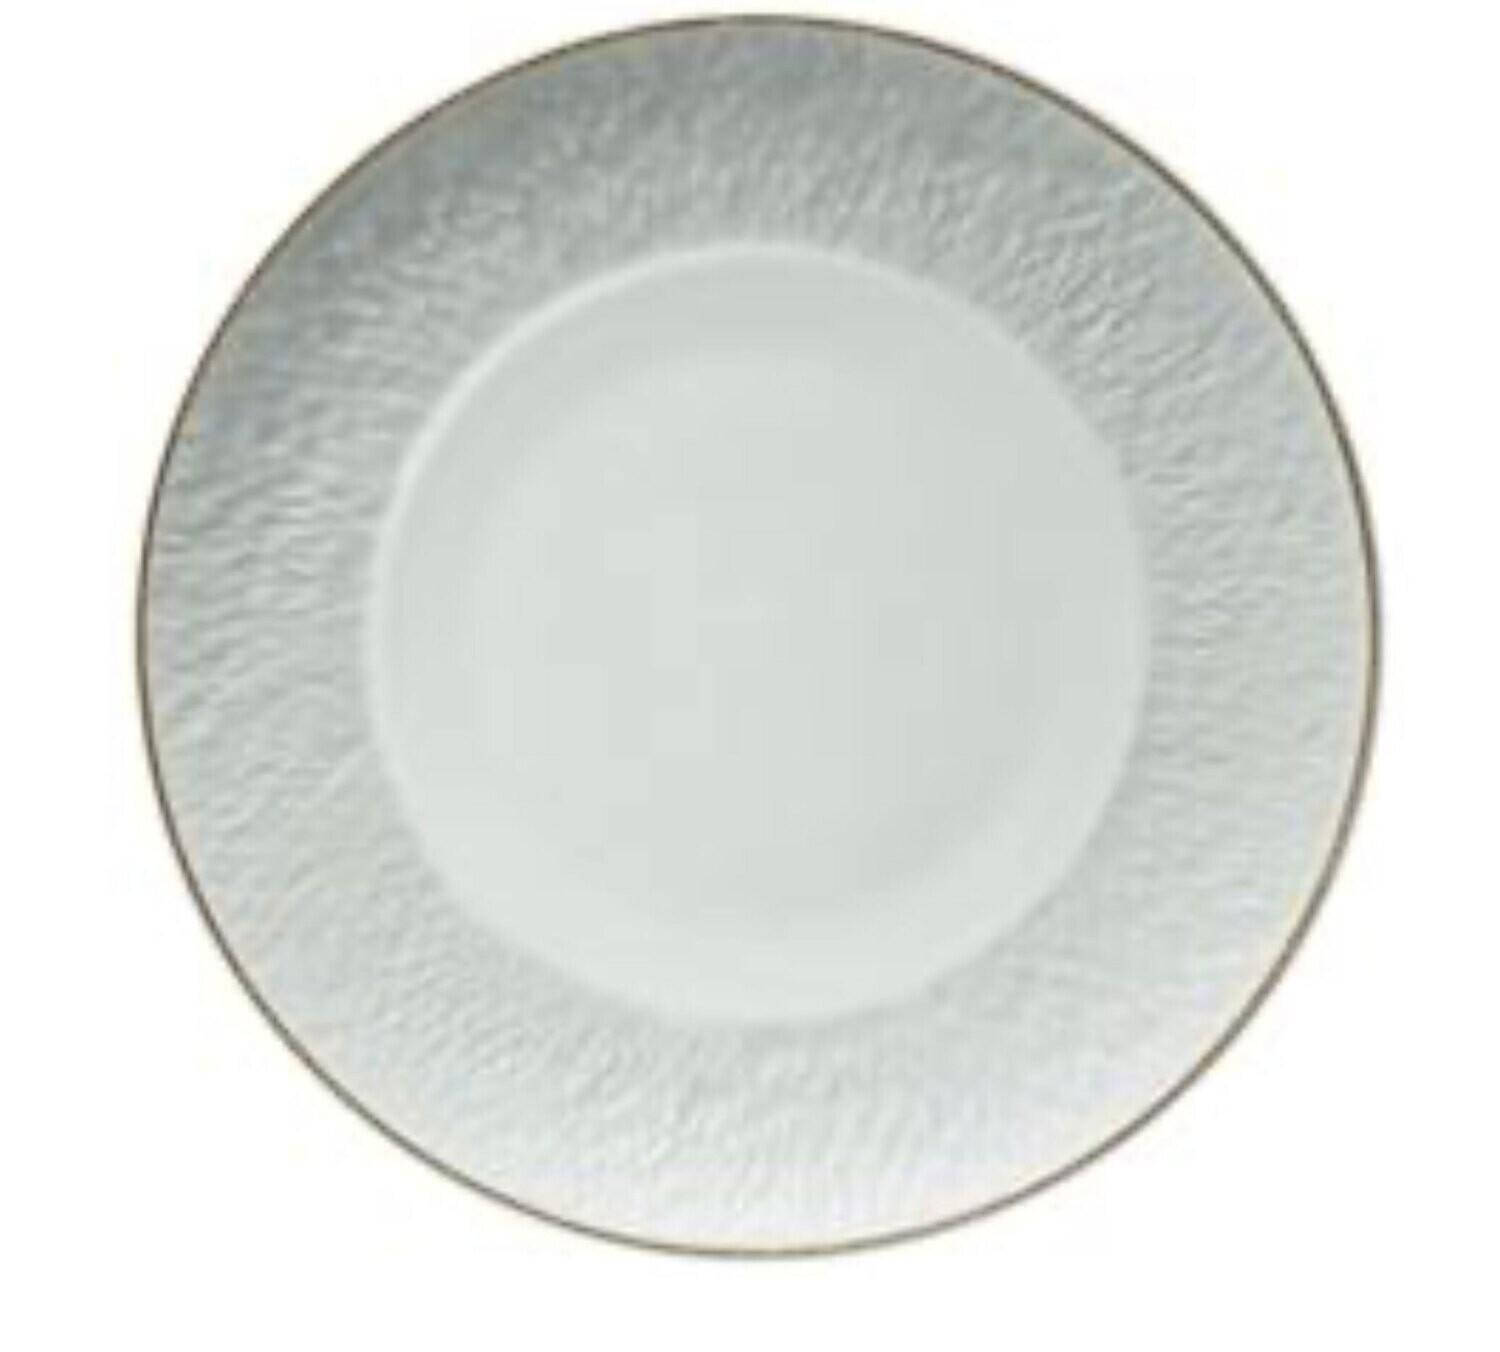 Raynaud Limoges Mineral Filet Or Gold- Deep plate with engraved rim 10.6 in 0348-21-250027